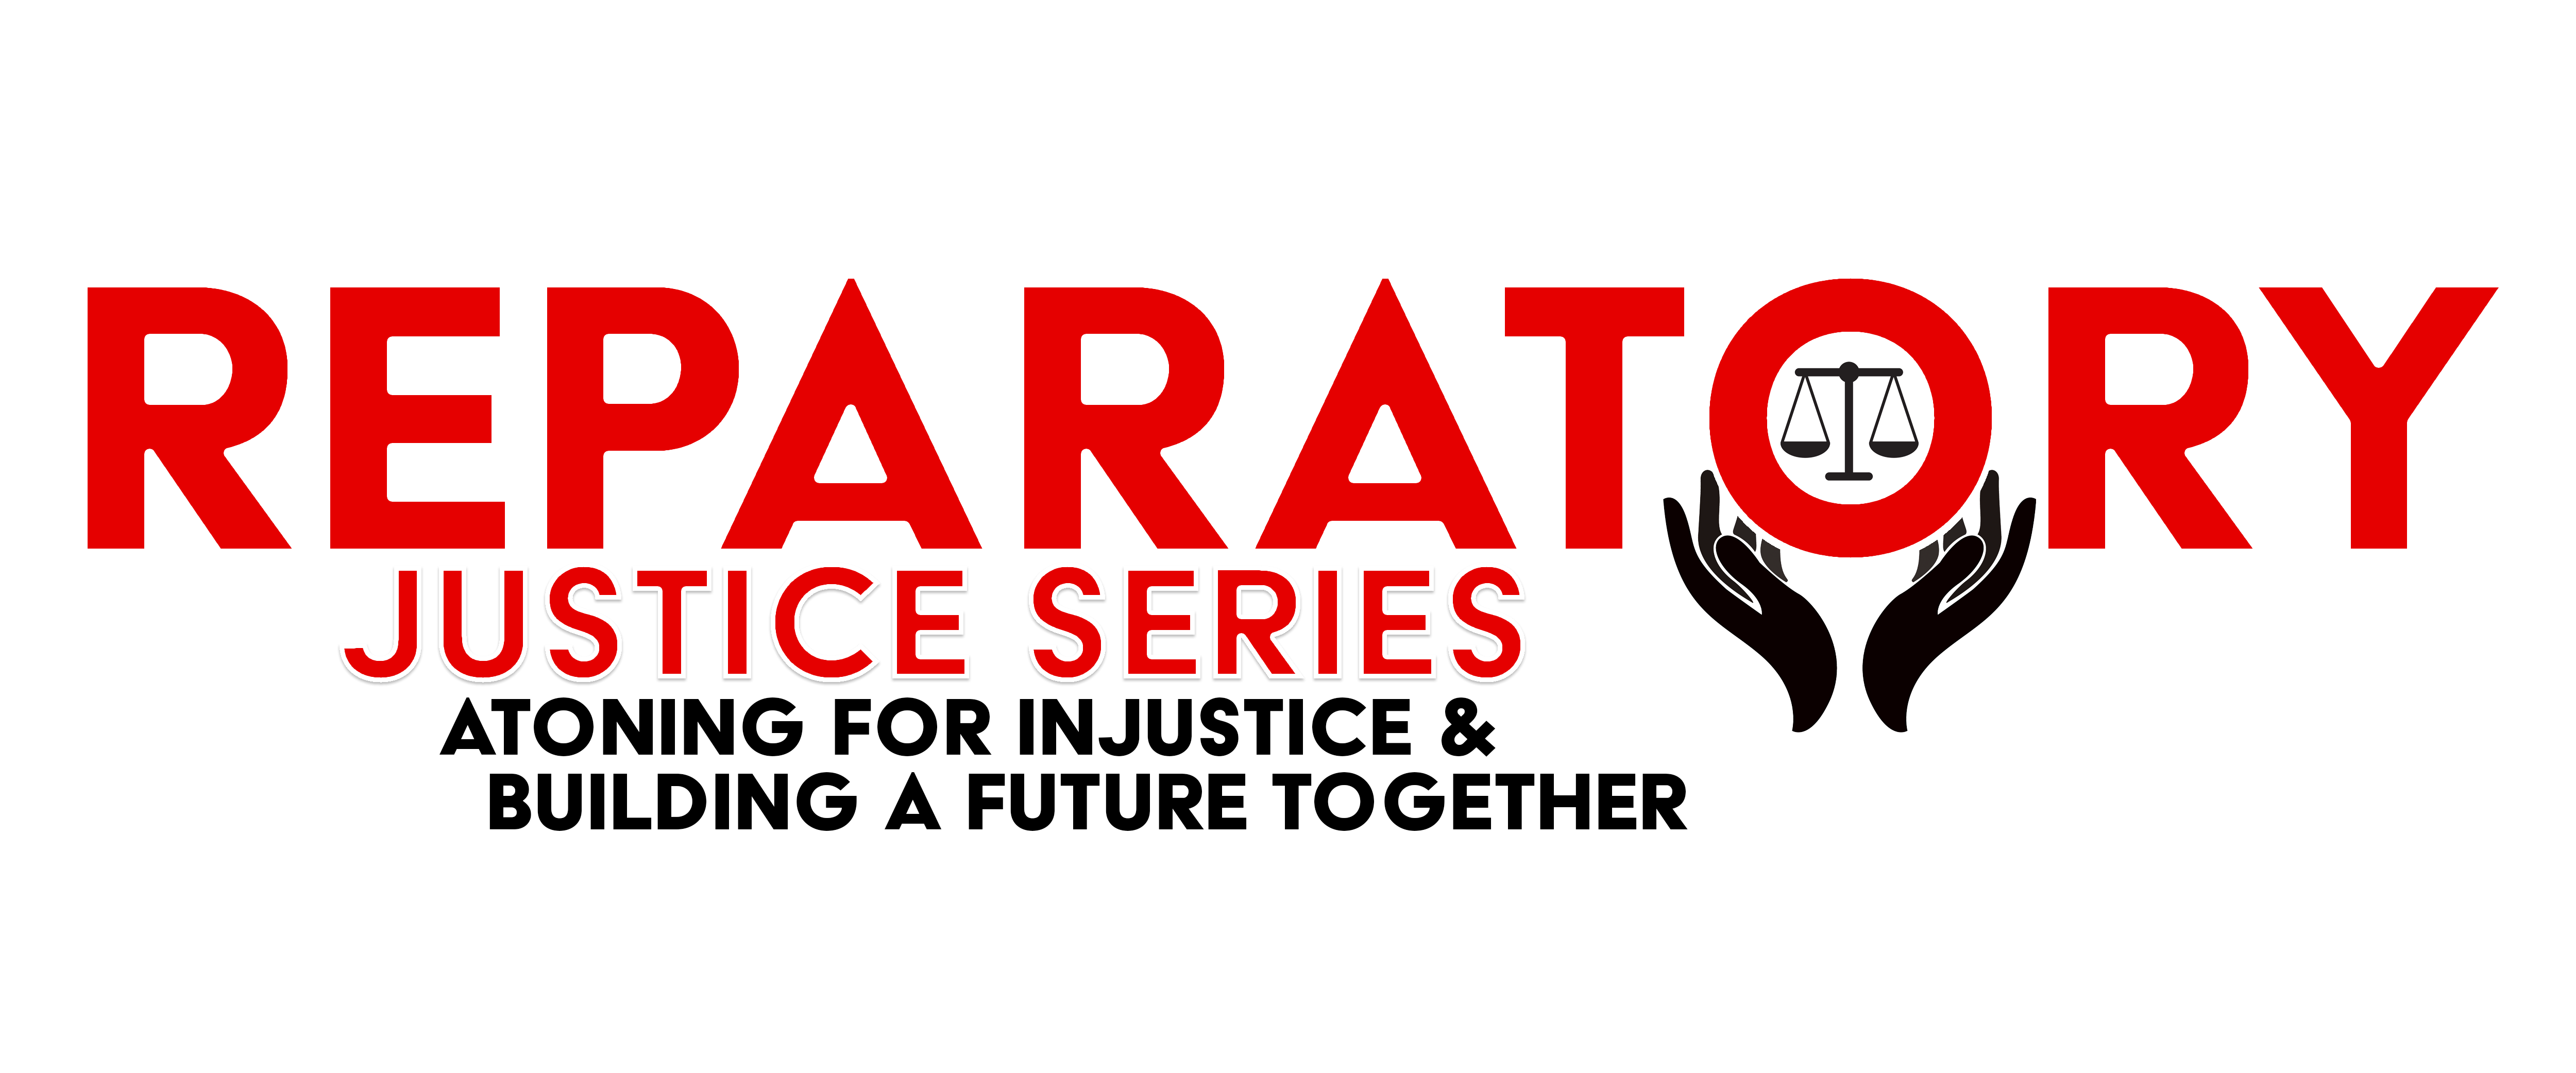 Reparatory Justice Series – National Council of Churches